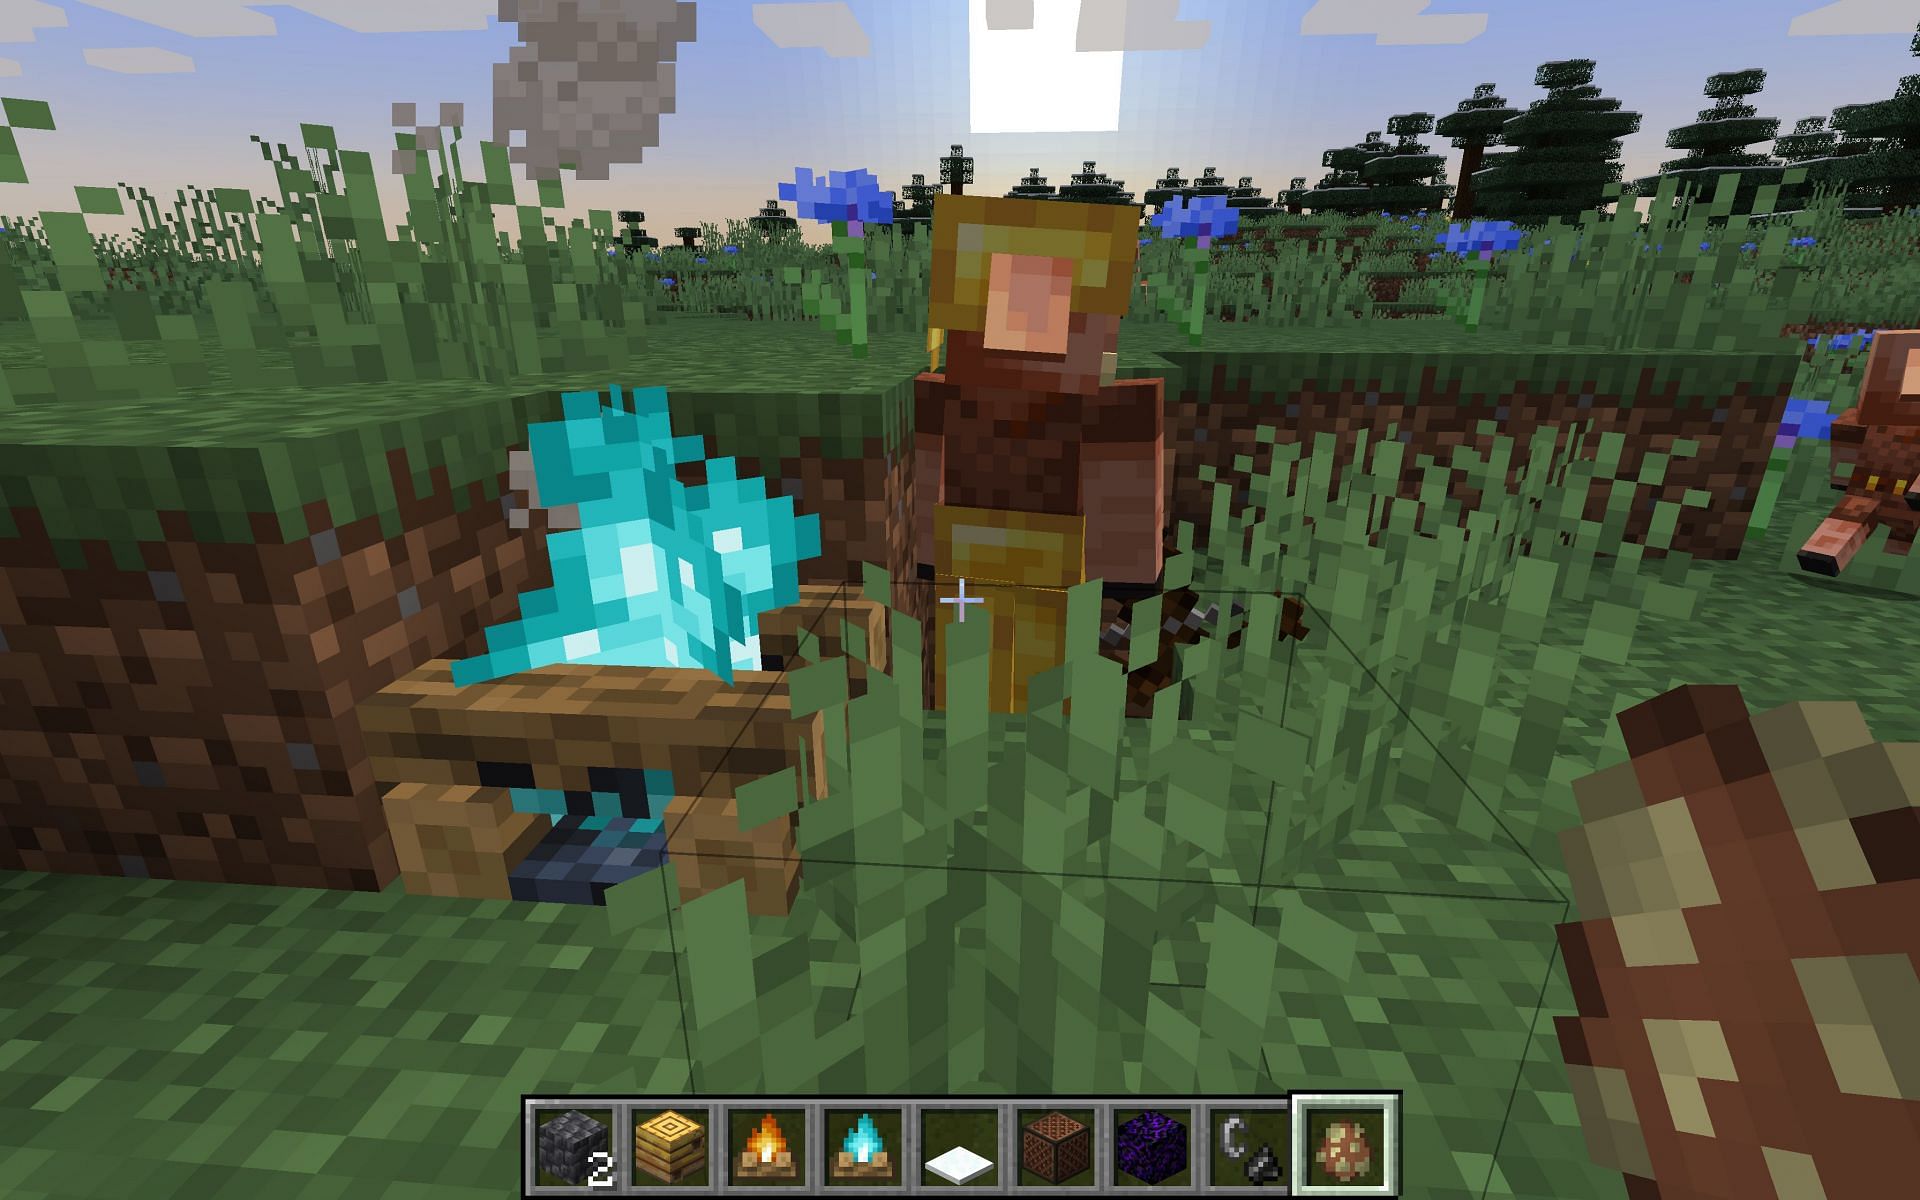 Players can keep piglins at bay using the soul campfire (Image via Minecraft)